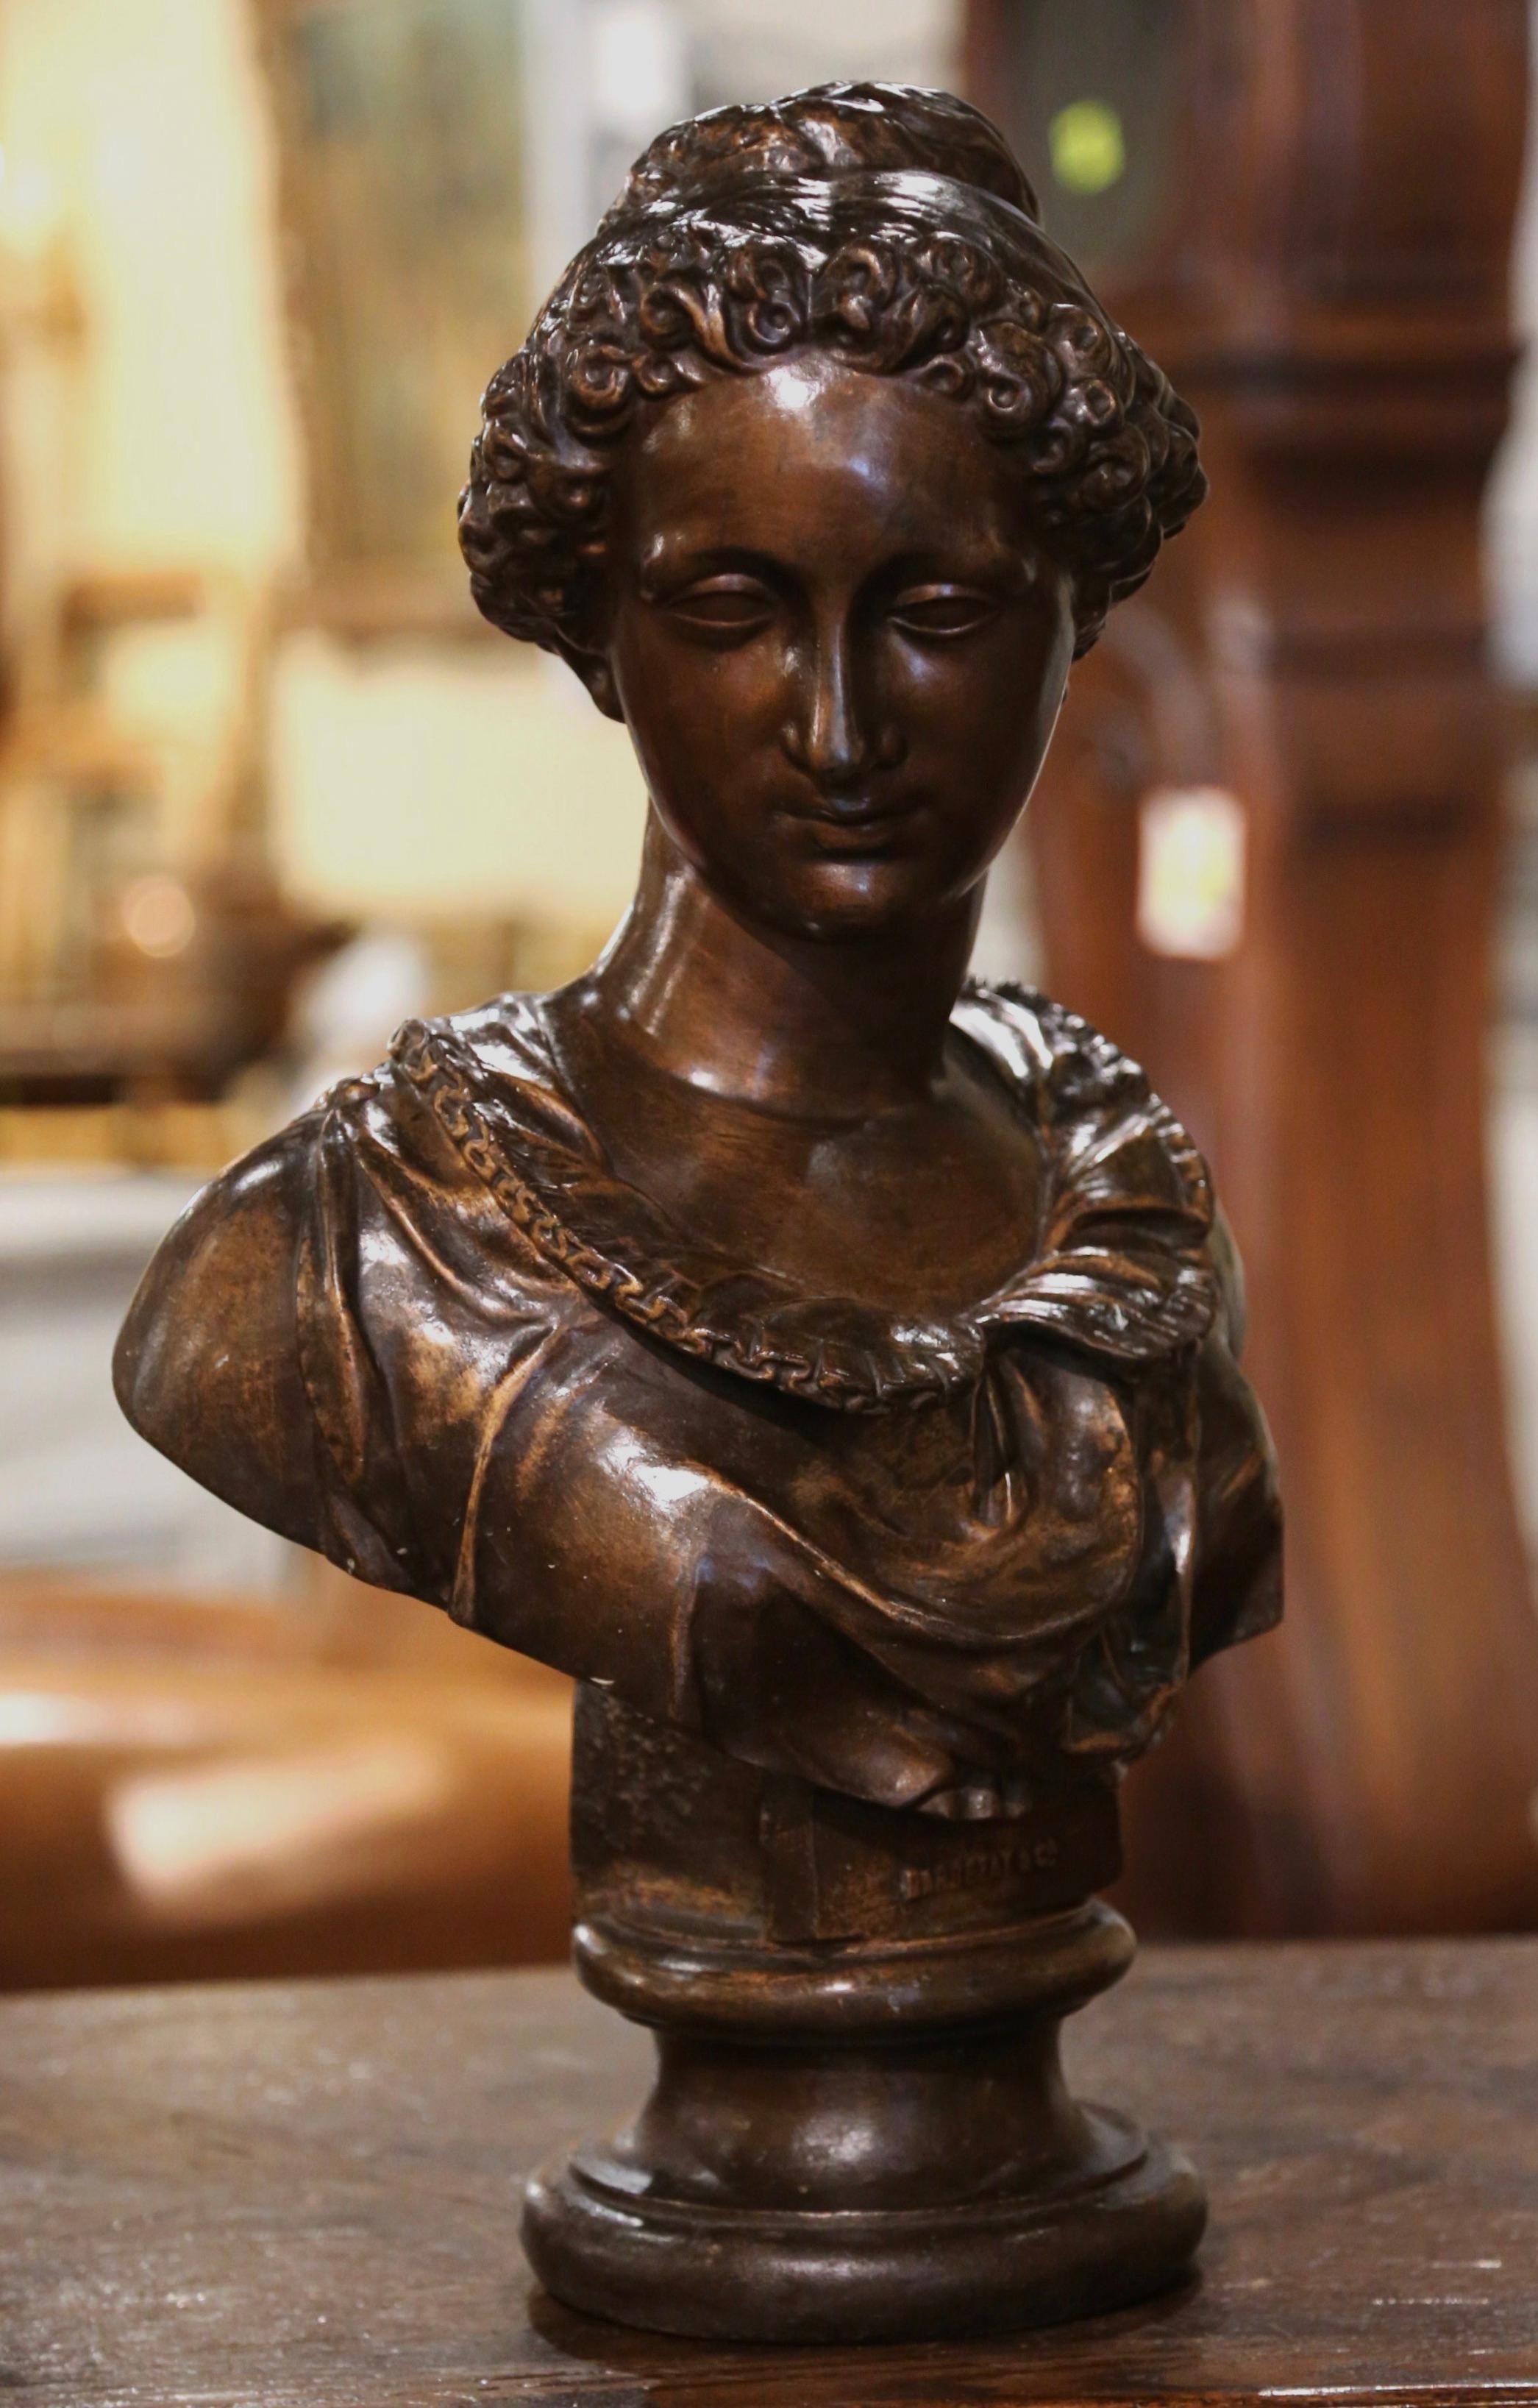 This elegant bust was sculpted in France, circa 1880. The sculpture sits on an integral round base and depicts a young beauty in traditional Louis XVI clothing; the art work is signed on the front 